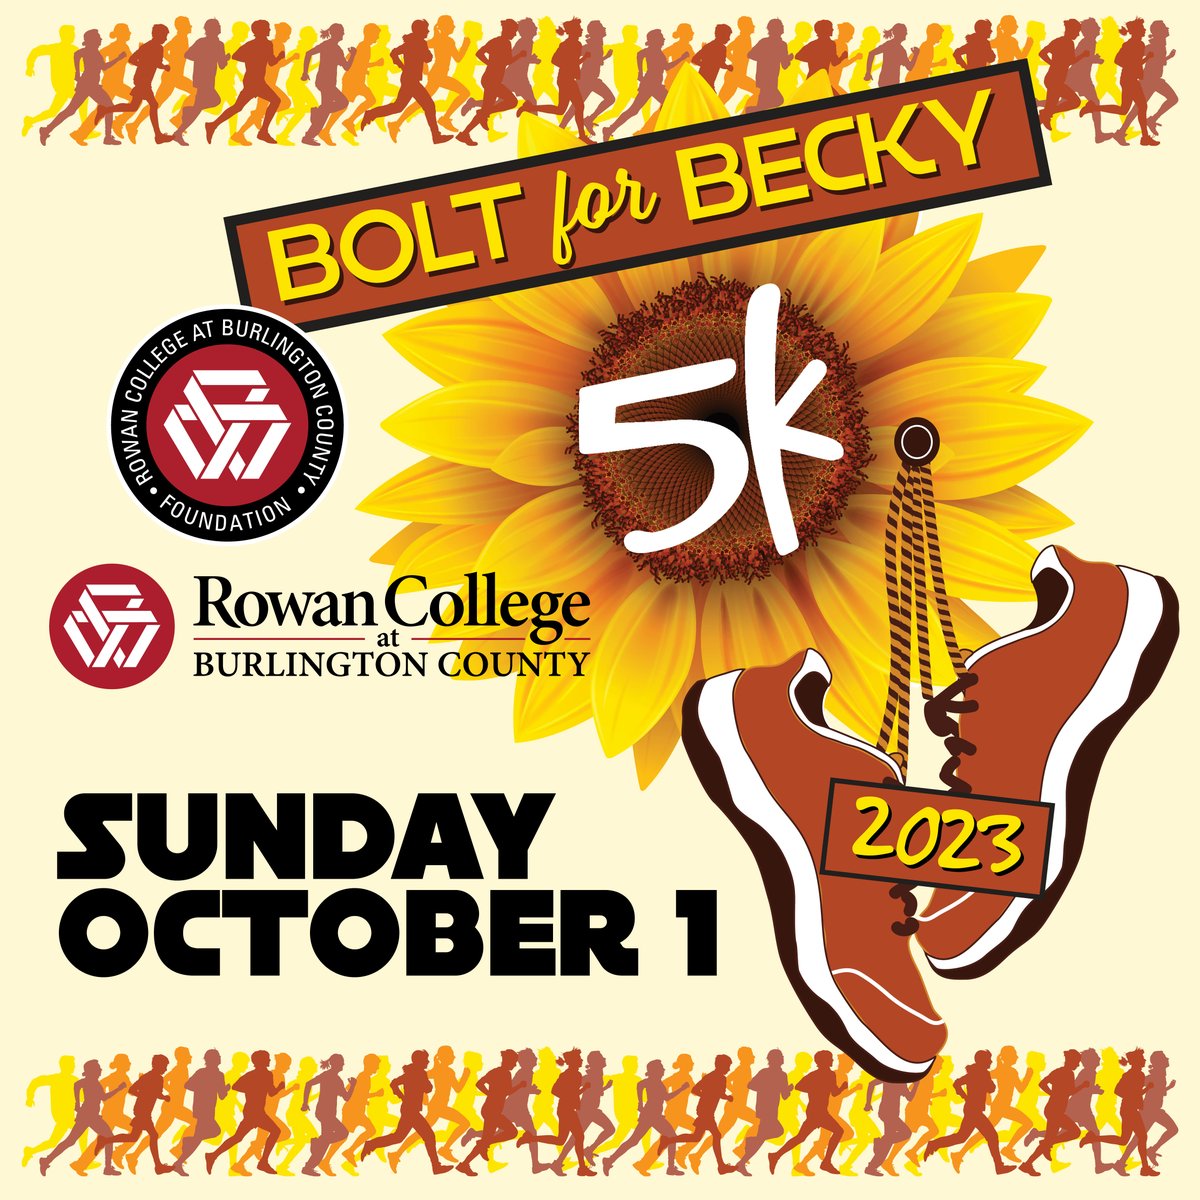 Lace-up your 👟running shoes and register today for Bolt for Becky 5K, honoring the late Rebecca Scott, who was diagnosed with Stage IV metastatic breast cancer. 💯 of the proceeds benefit the Rebecca Scott Memorial Scholarship Fund. #breastcancerawareness #fightbreastcancer